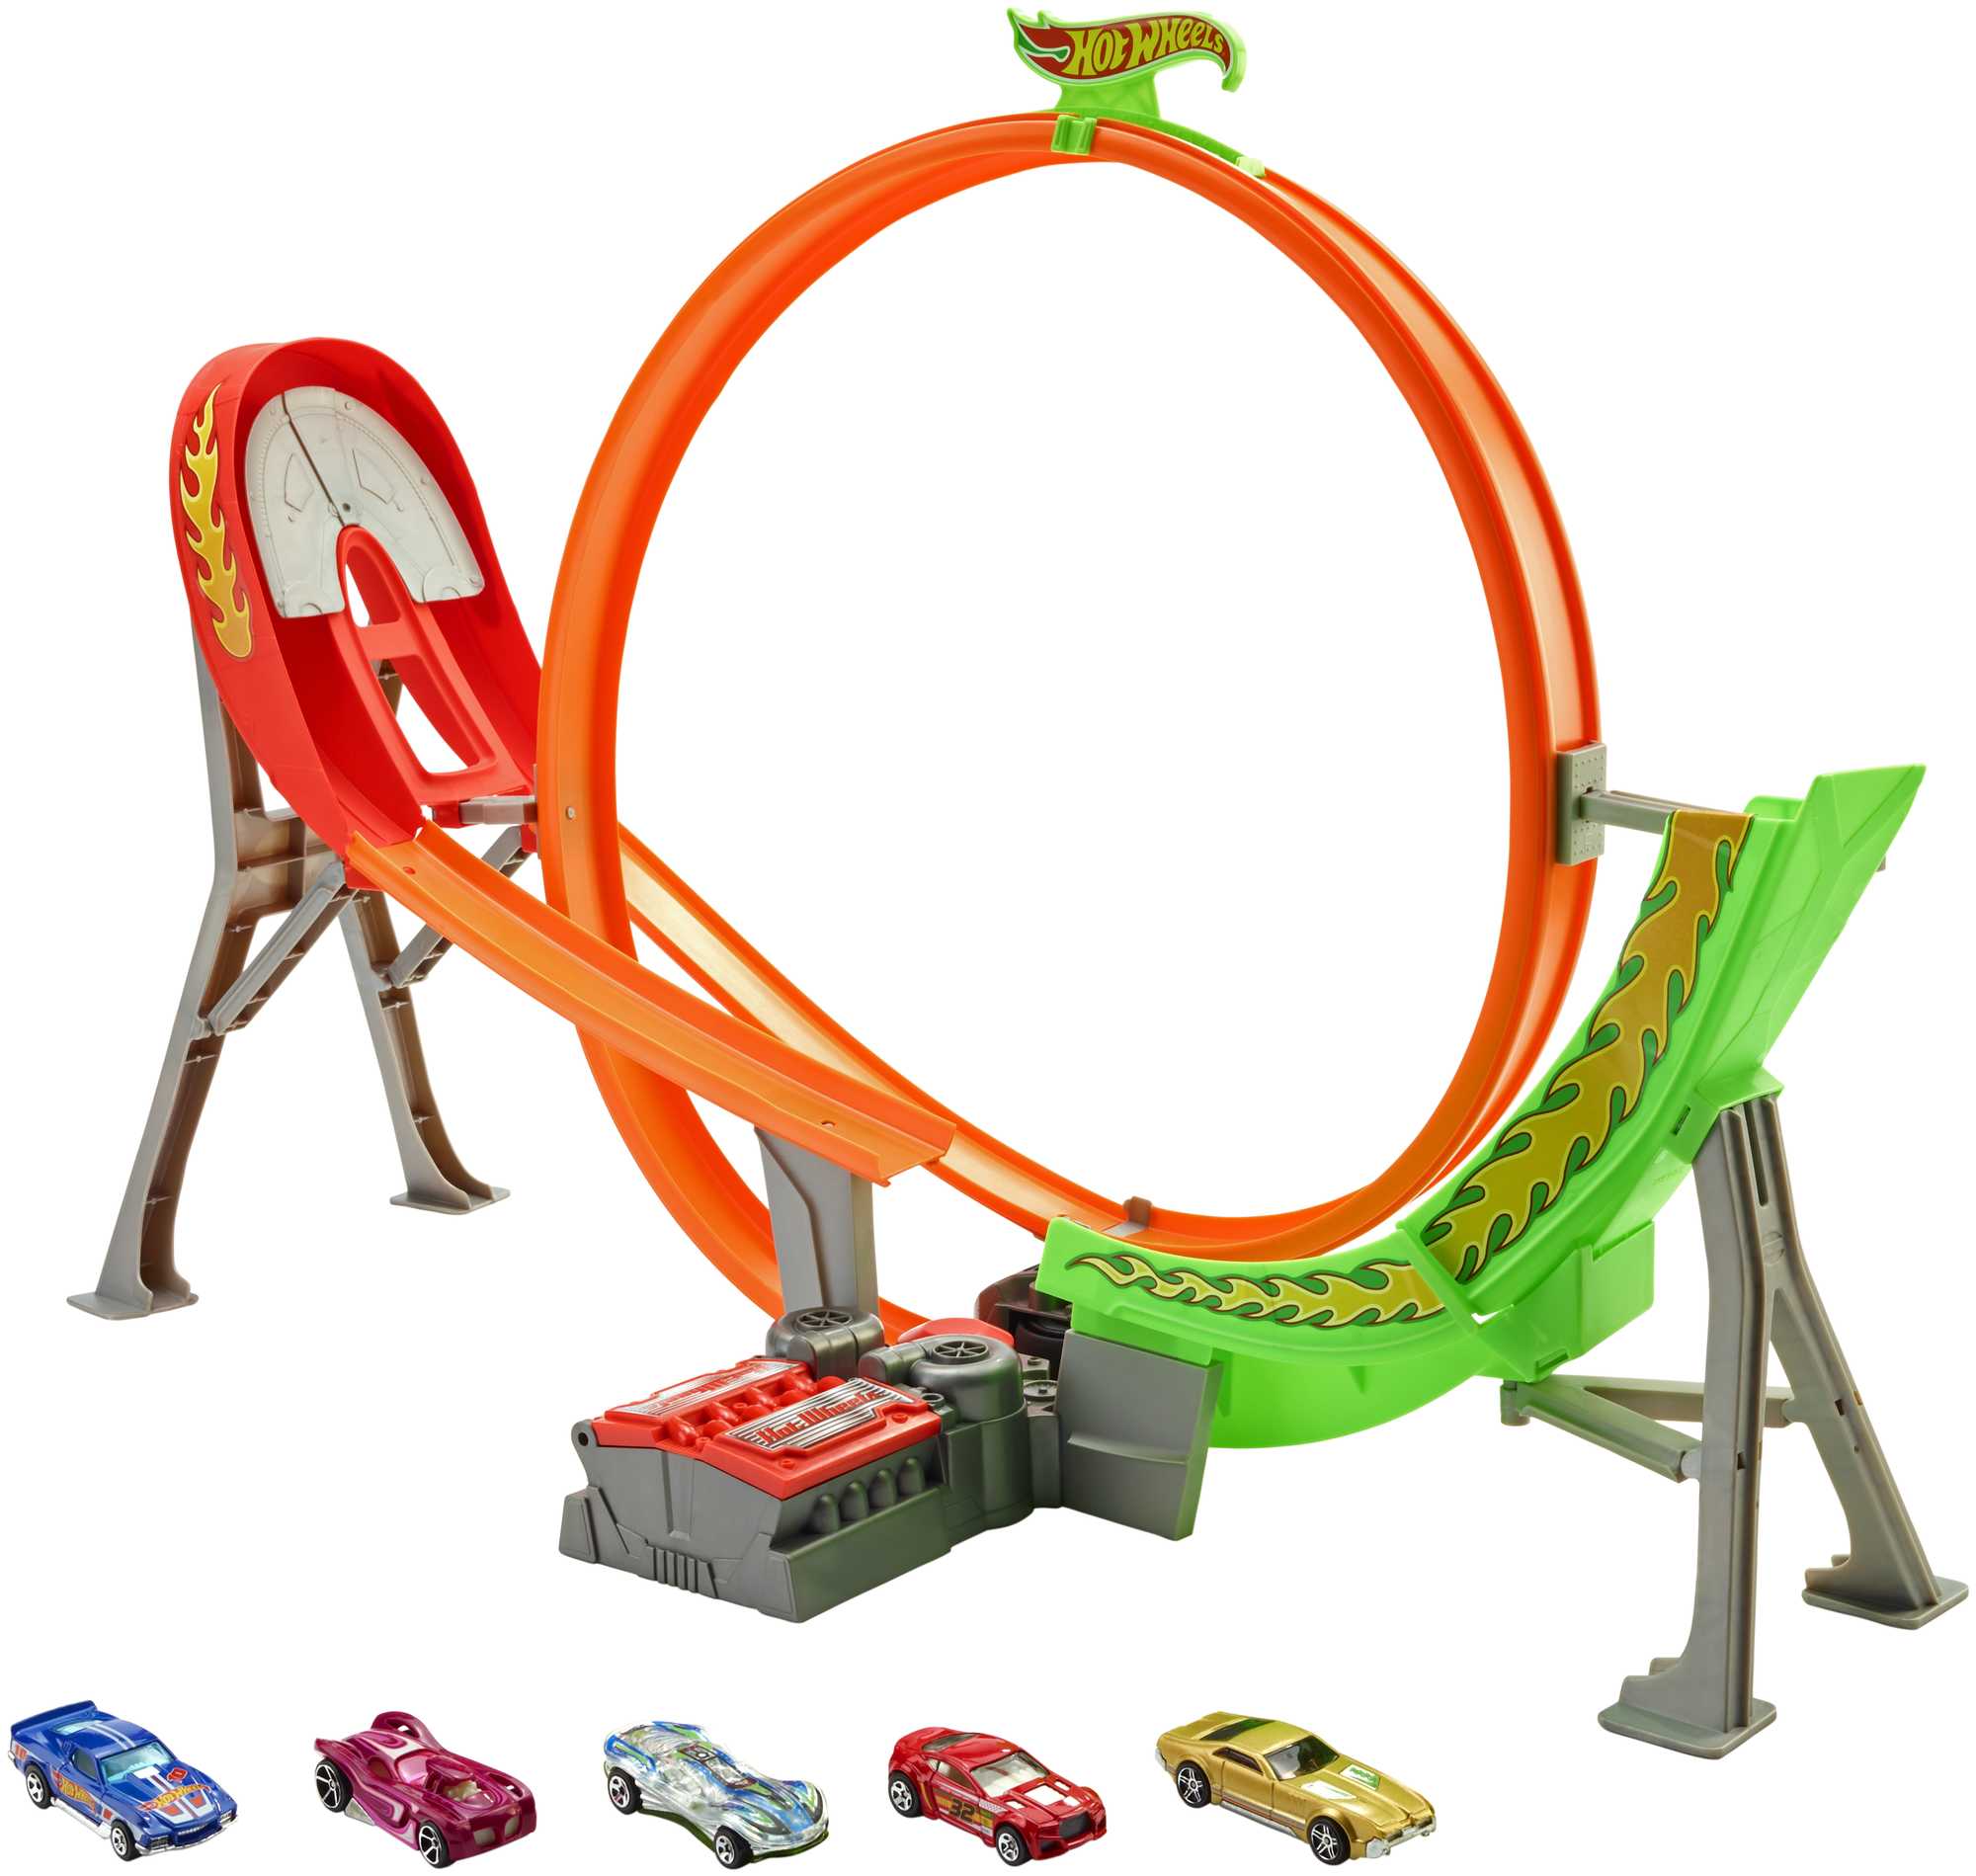 Hot Wheels Action Power Shift Motorized Raceway Track Set, Includes 5 Cars in 1:64 Scale - image 1 of 7